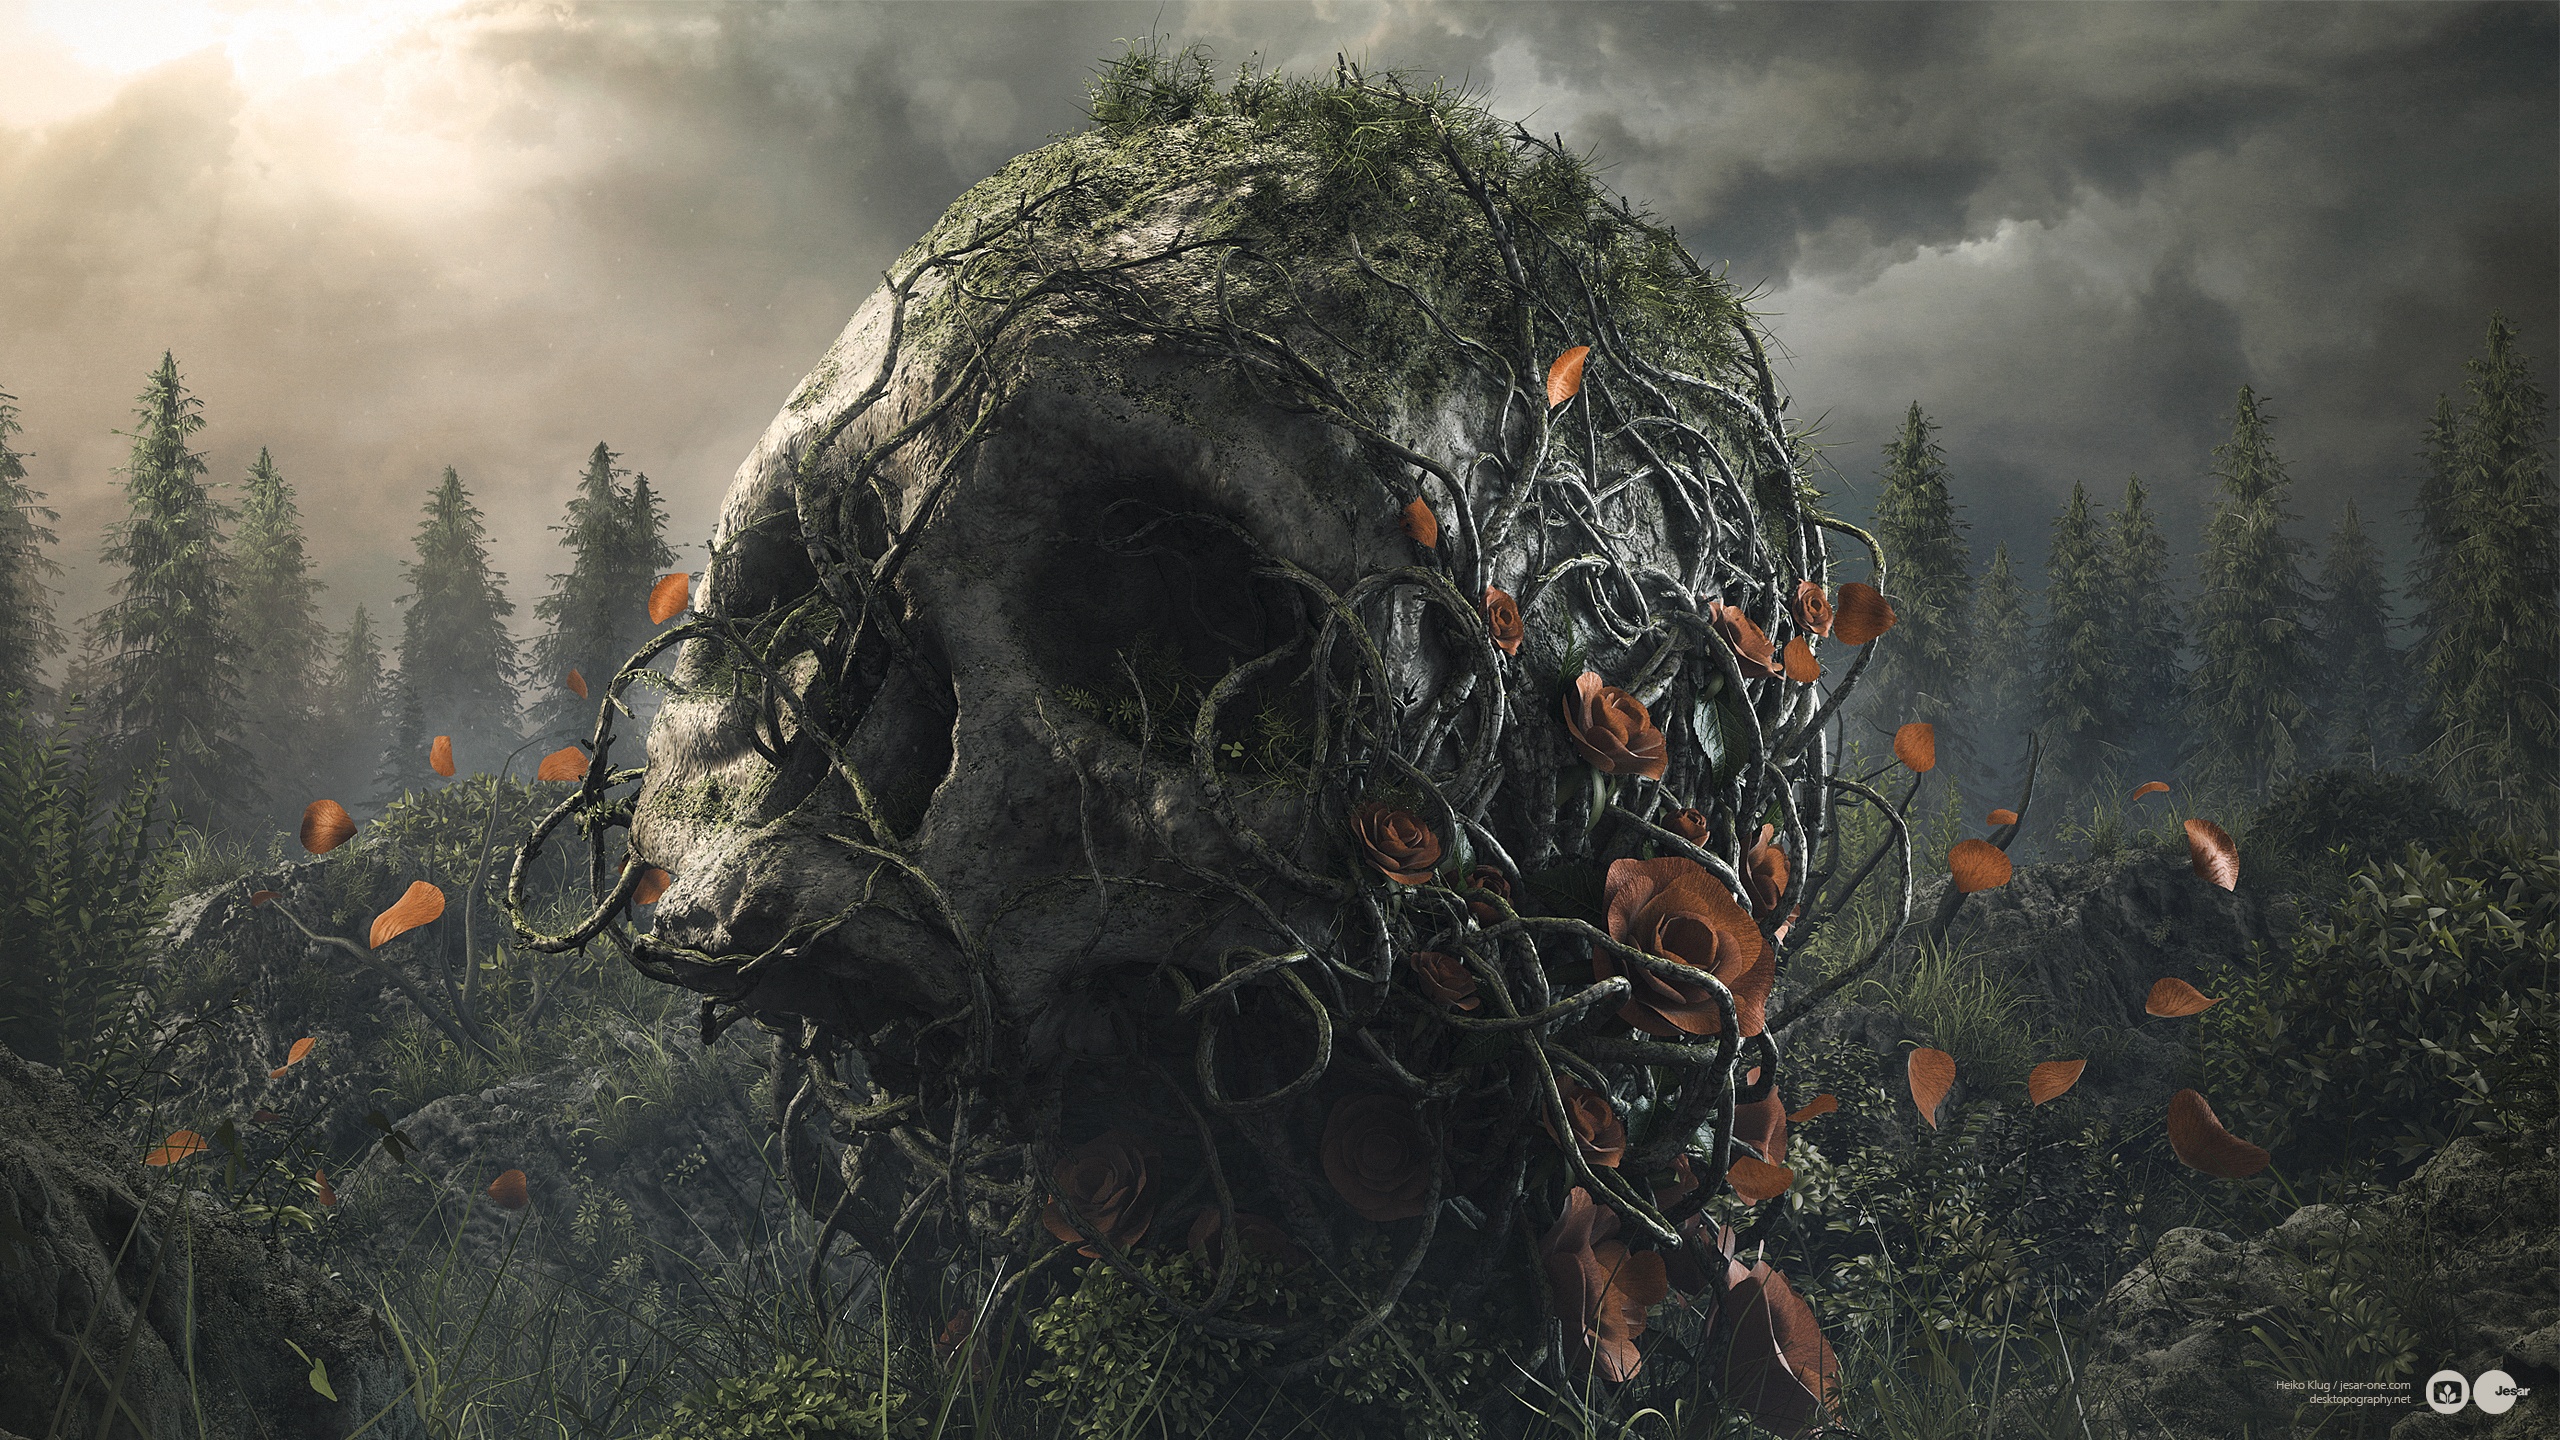 Skull Overgrown With Vines HD Wallpaper Background Image